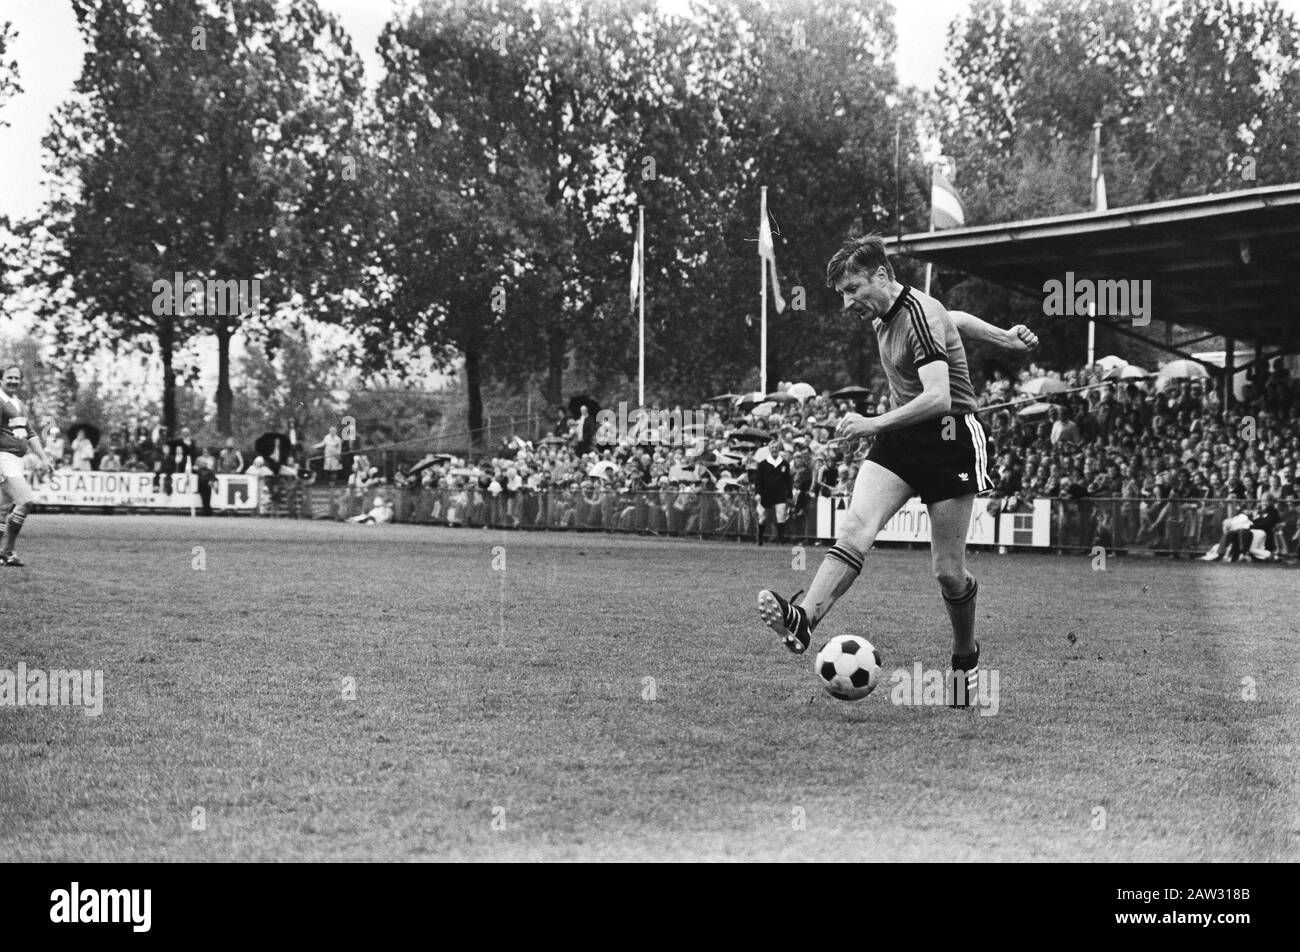 Boerhaave Soccer Tournament behalf of the National Fund Sports Disabled  Premier van Agt the ball Date: May 26, 1979 Location: Leiden, South Holland Keywords: prime ministers, politicians, football Person Name : Agt, Dries van Stock Photo